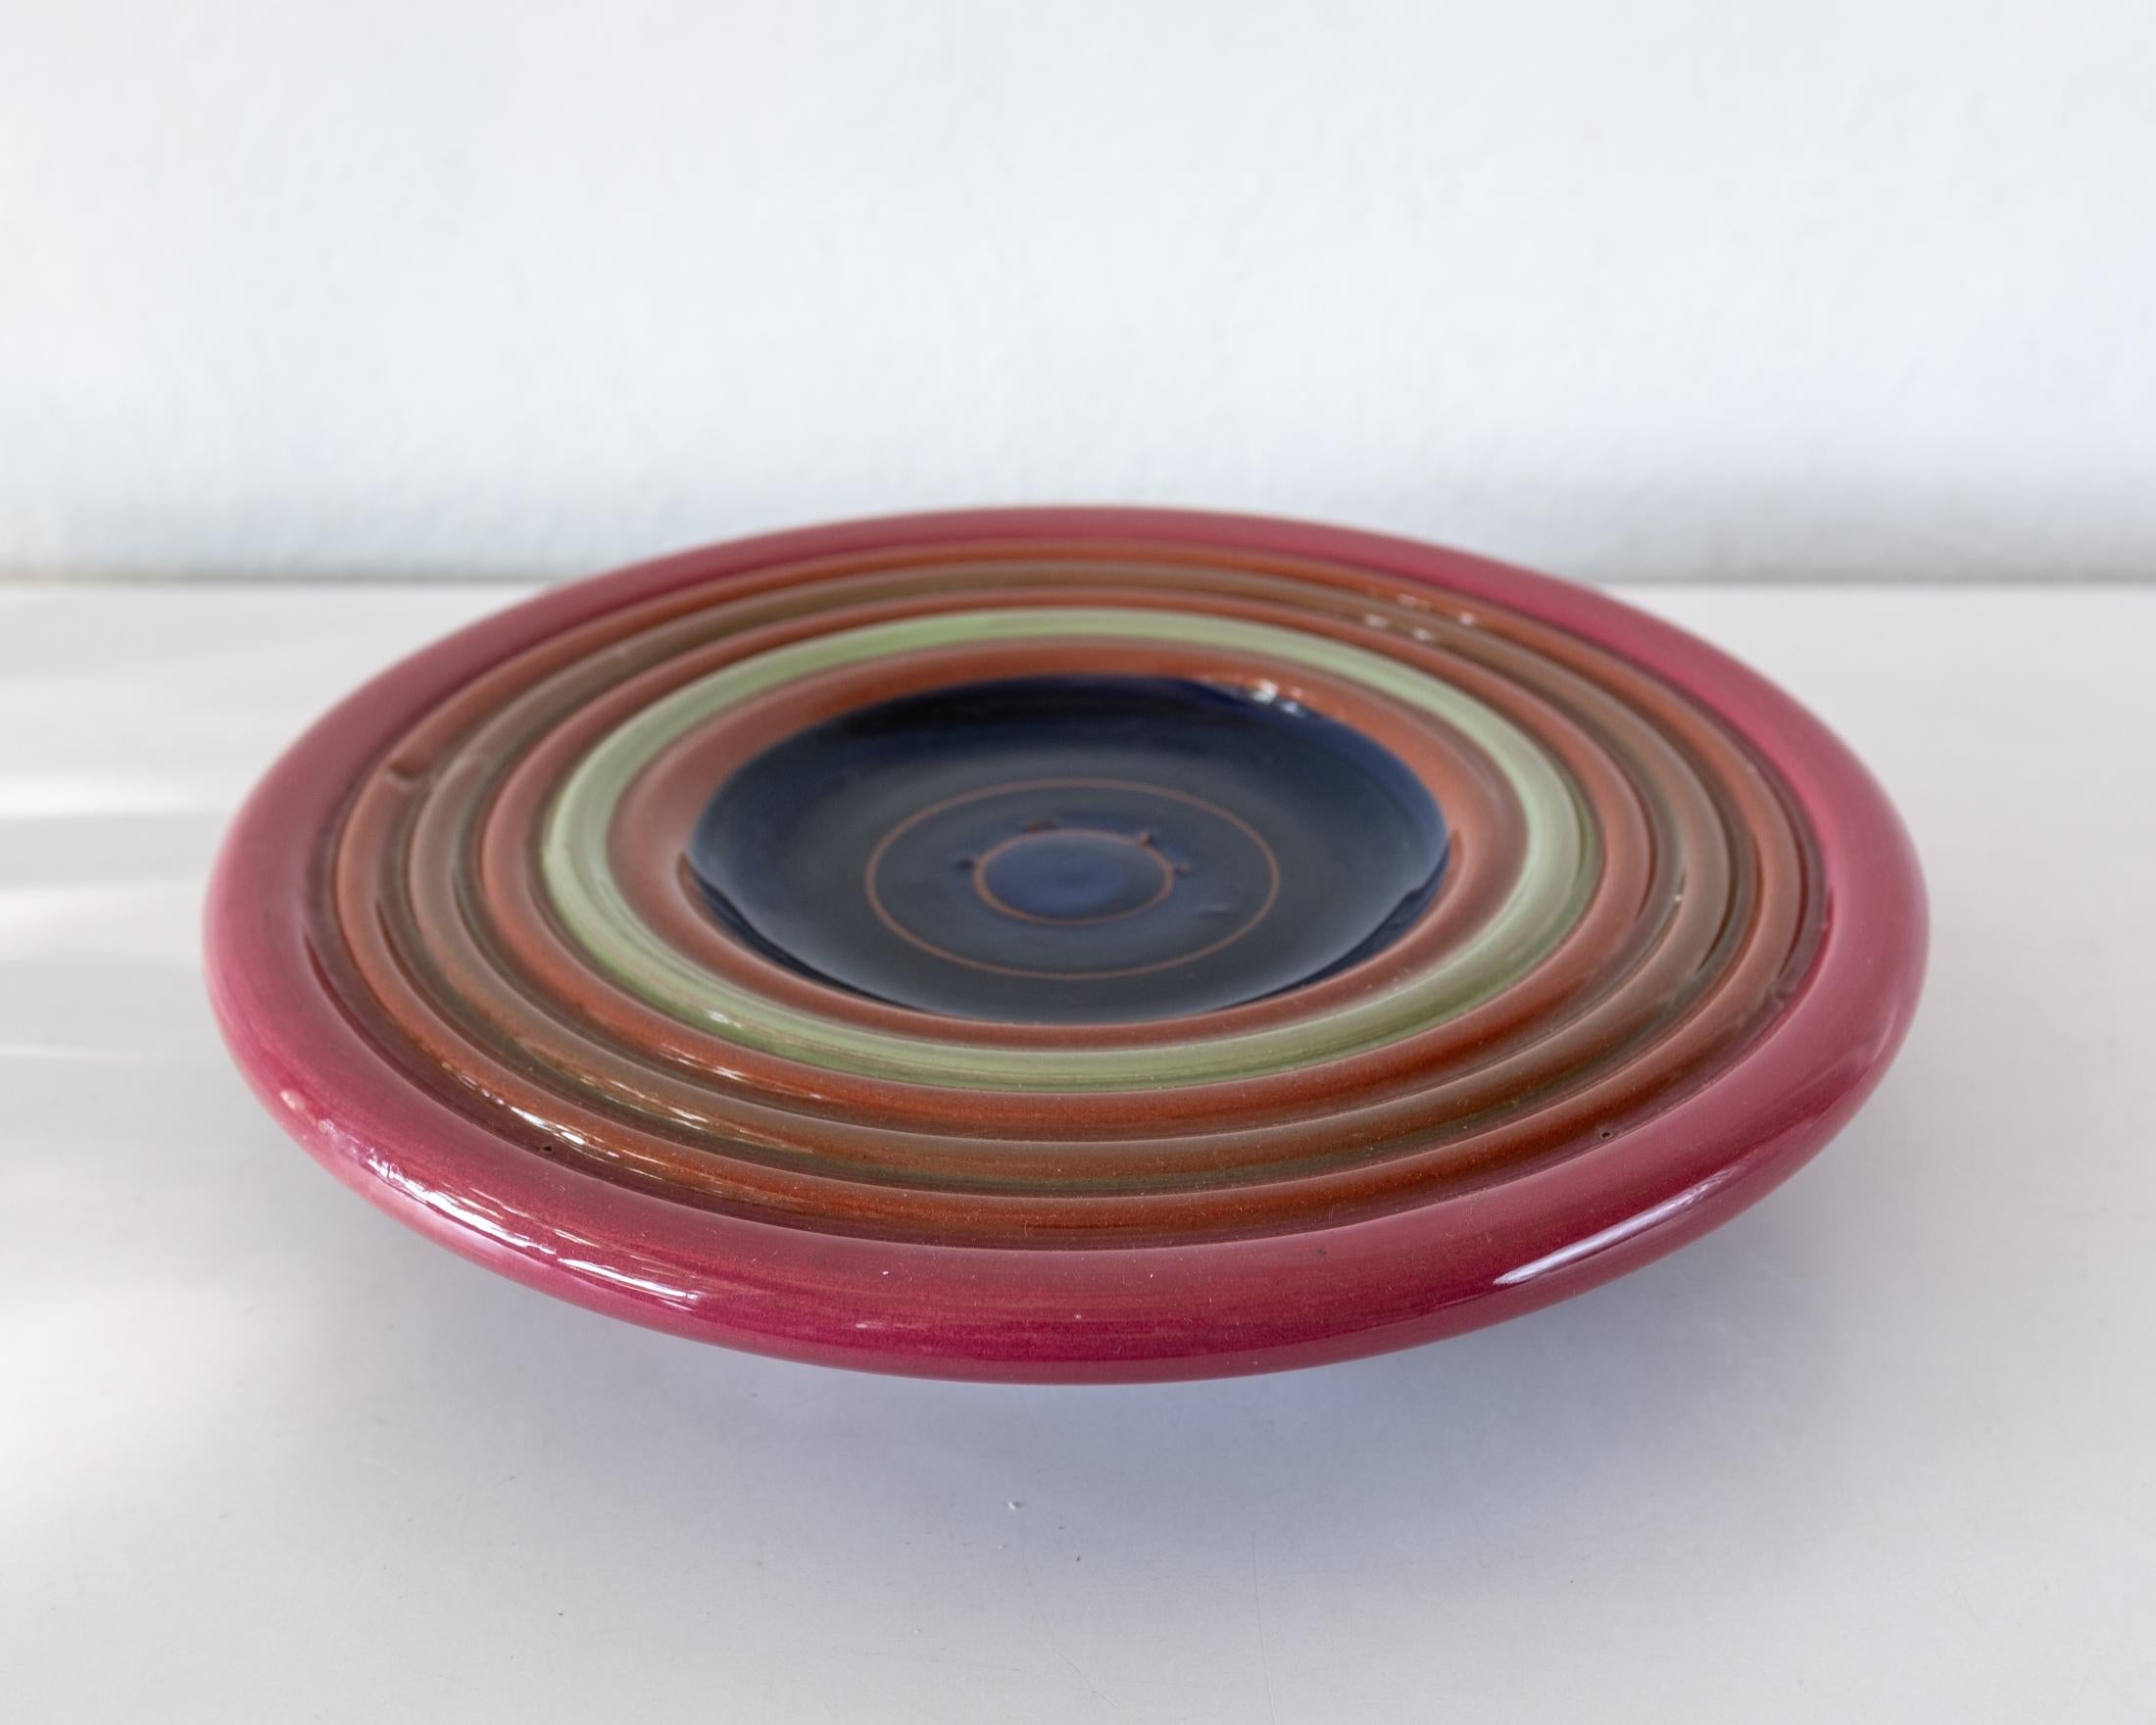 Compote or shallow bowl by Peter Shire, a Los Angeles-based artist and founding member of The Memphis Group. Signed and dated 1997.